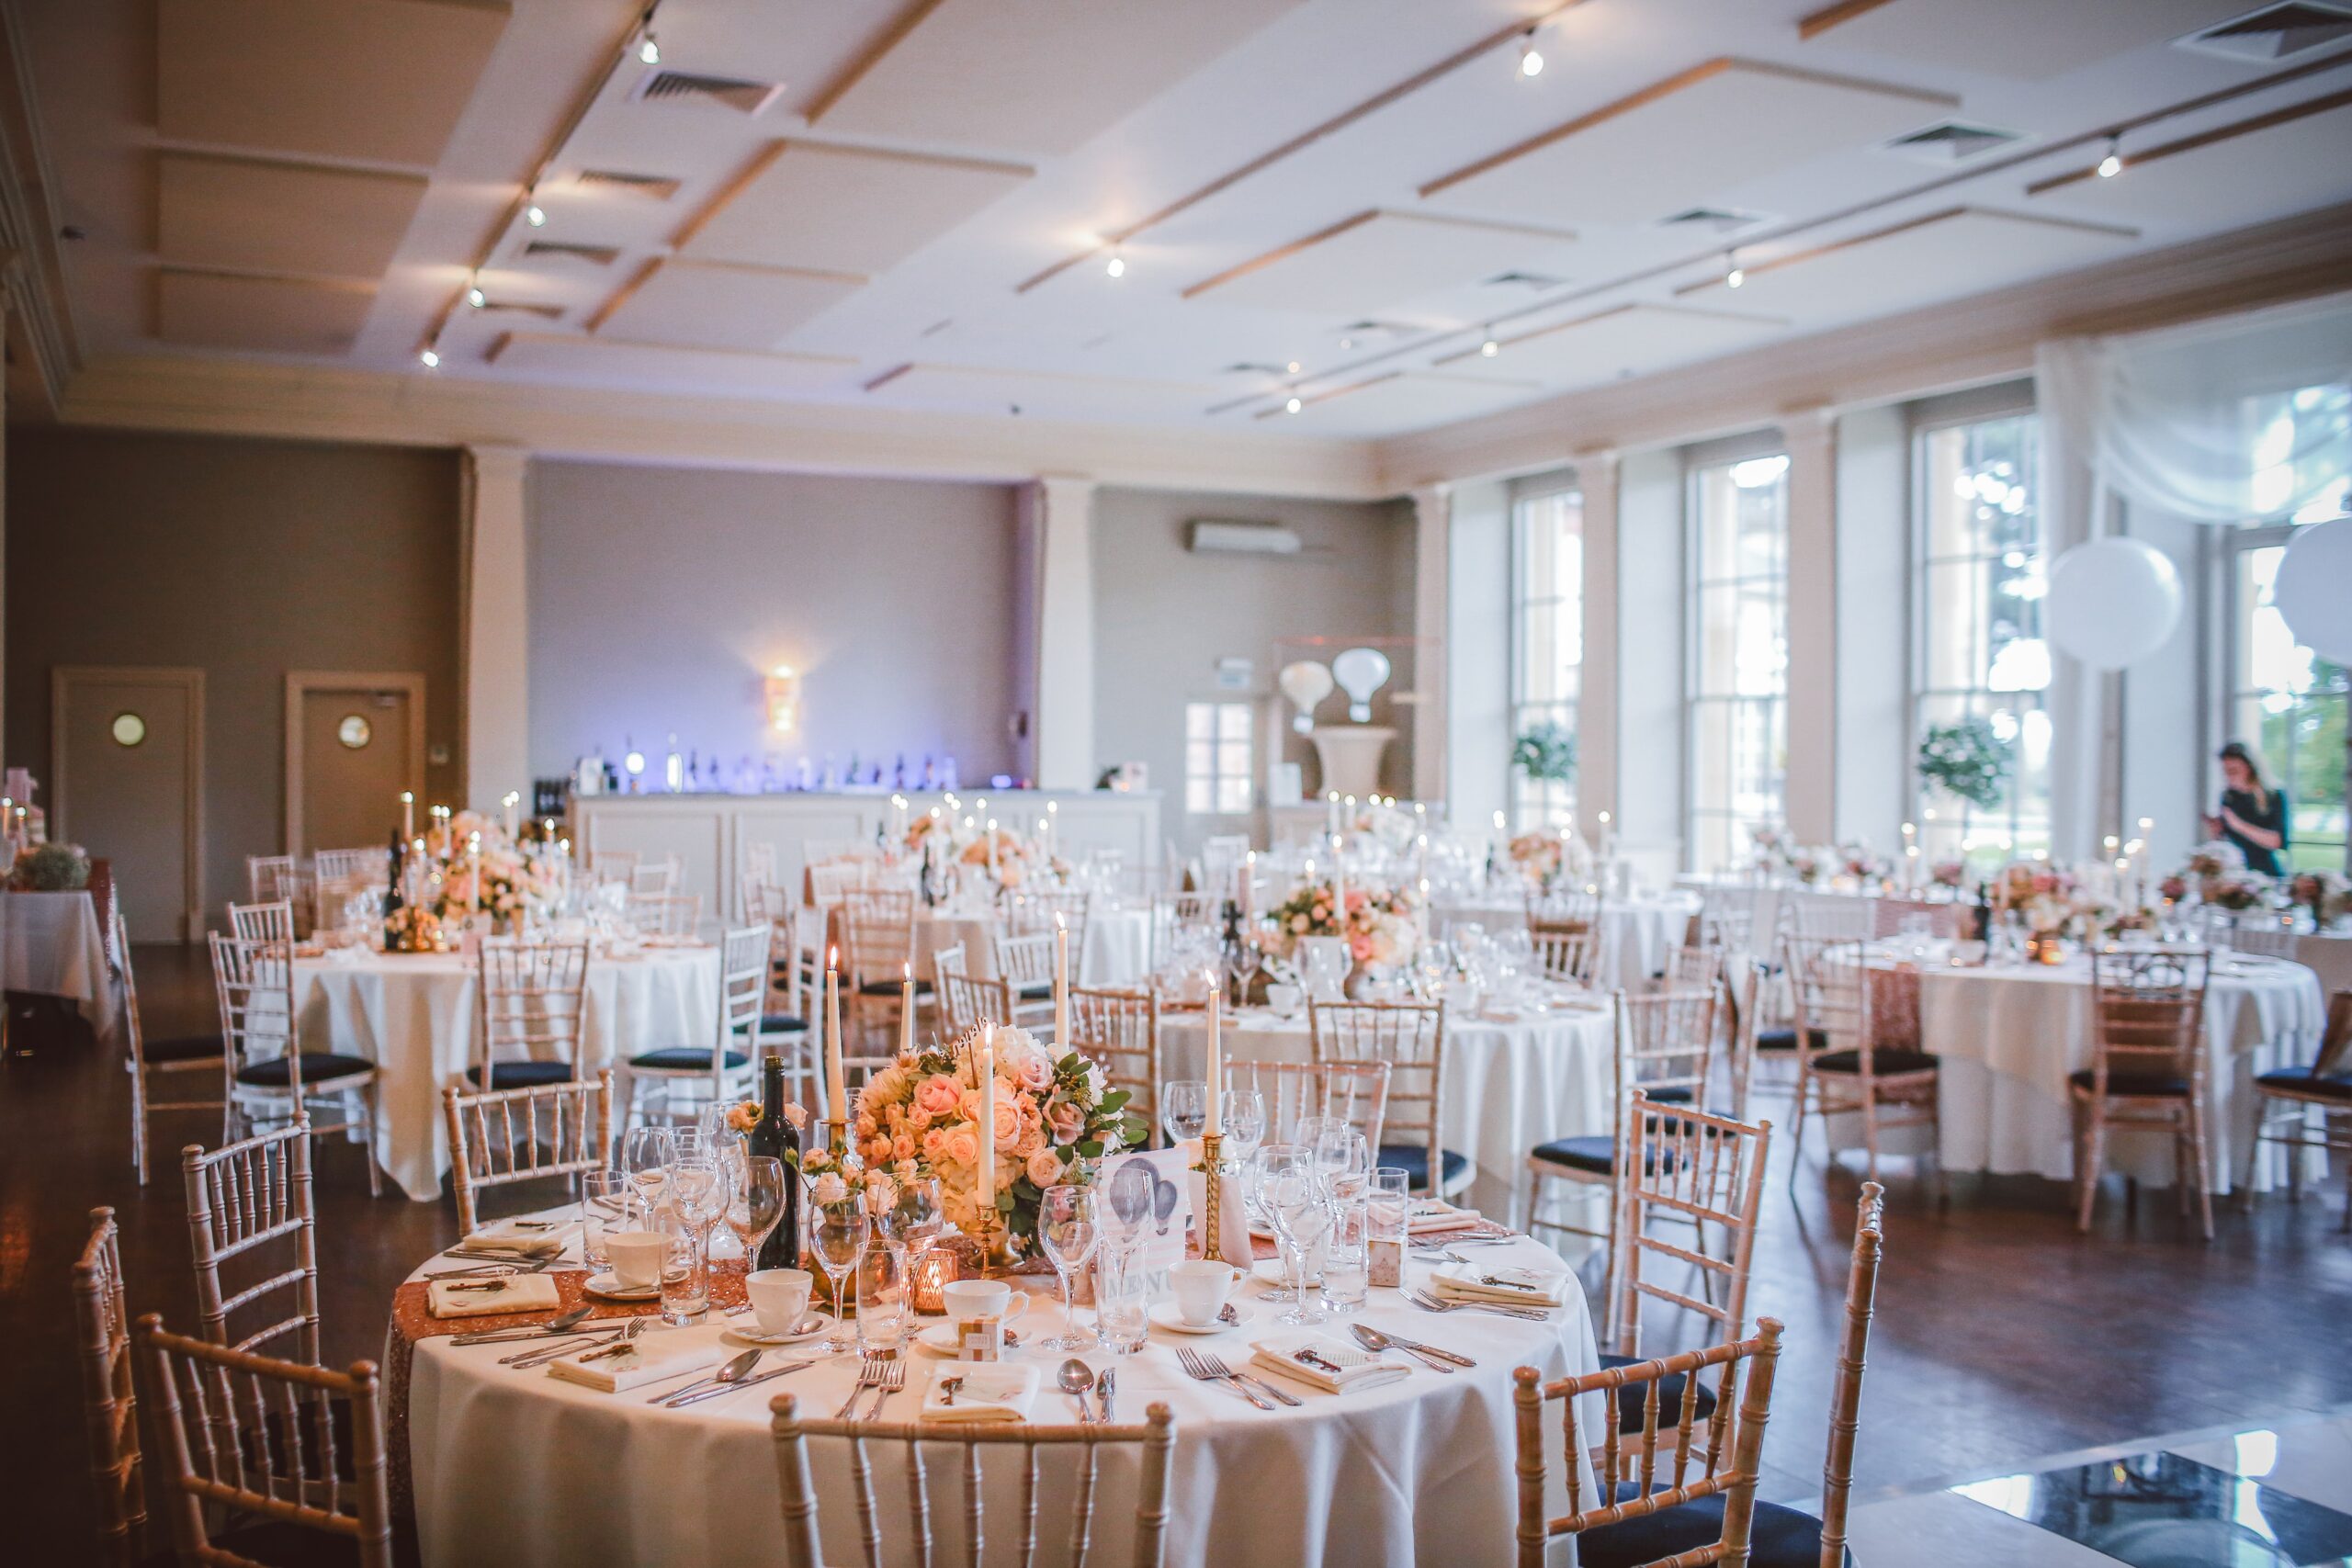 Why And How Long Before The Wedding Should You Hire A Wedding Planner?